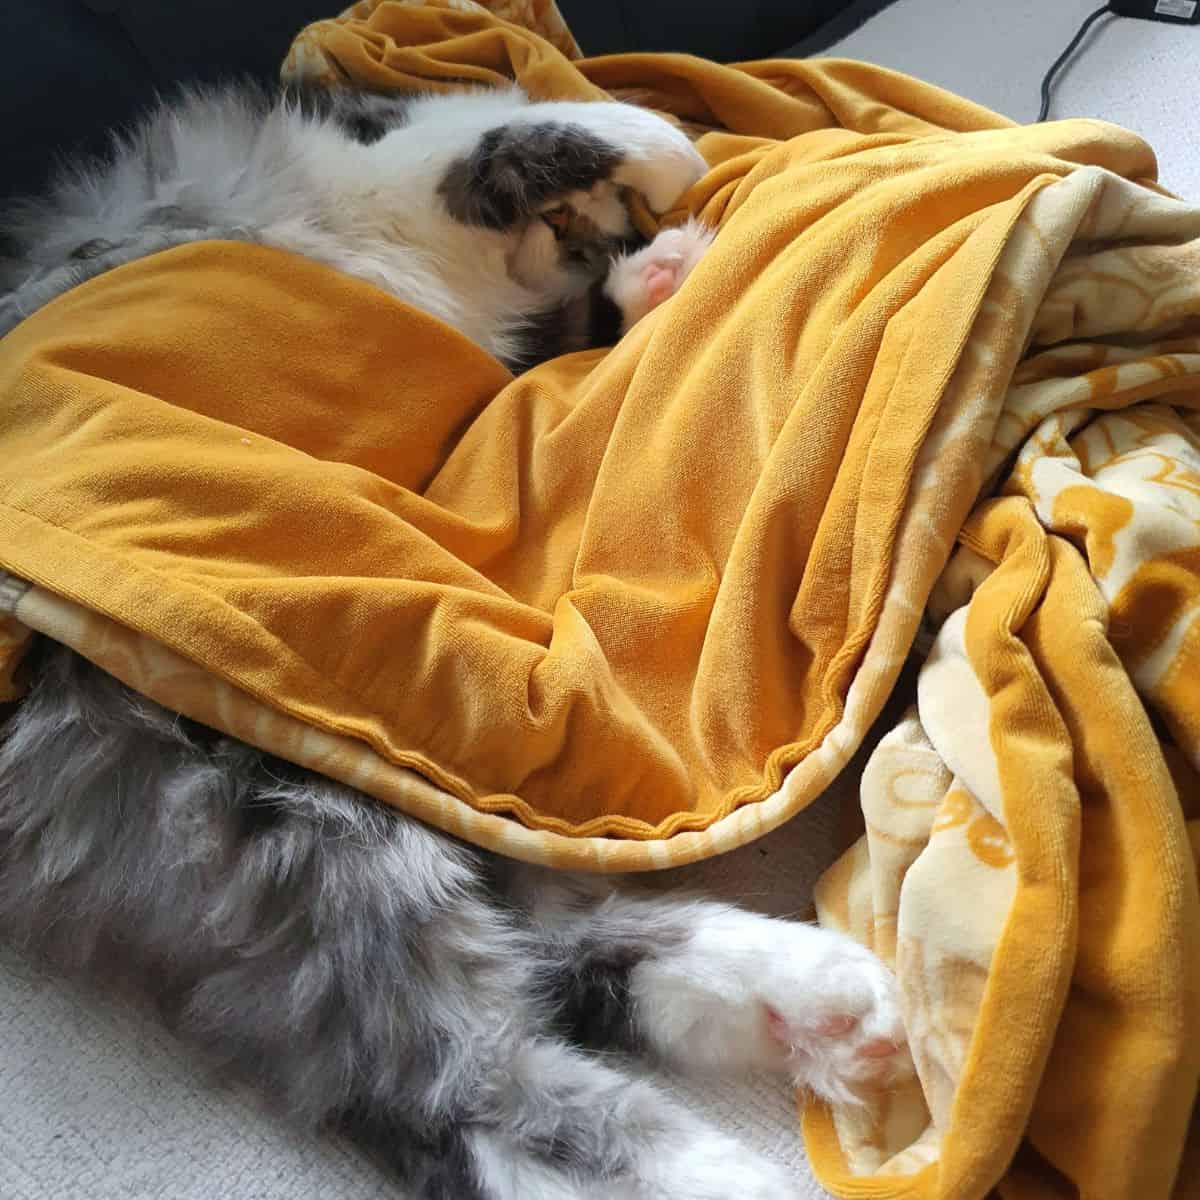 the cat sleeps wrapped in a yellow blanket